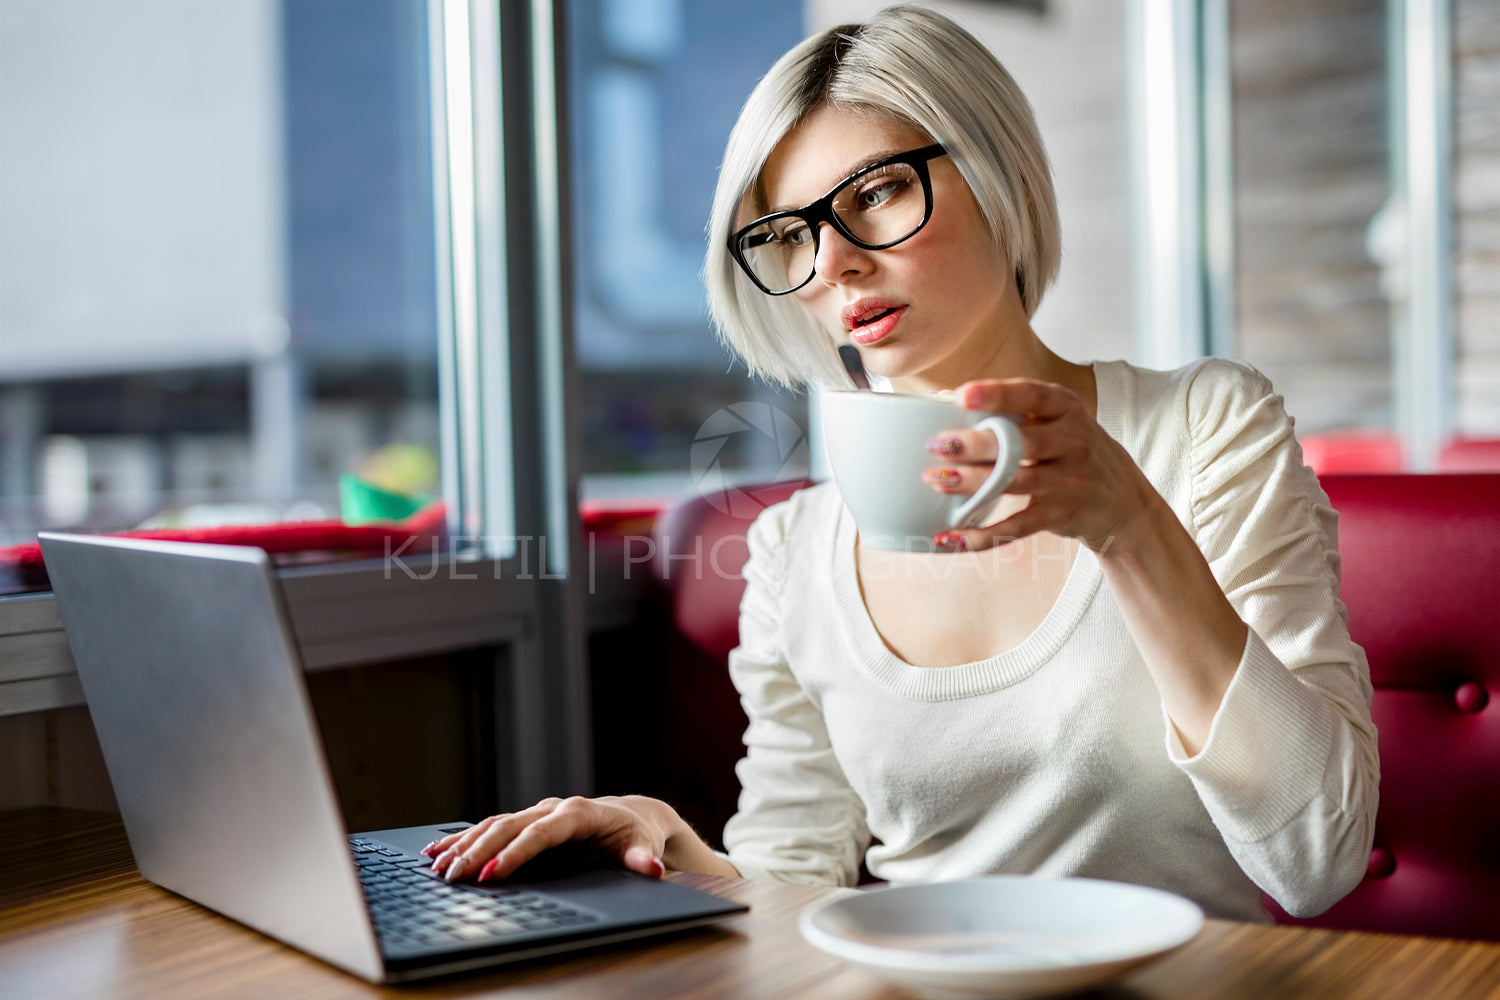 Woman Having Coffee While Working On Laptop In Cafe